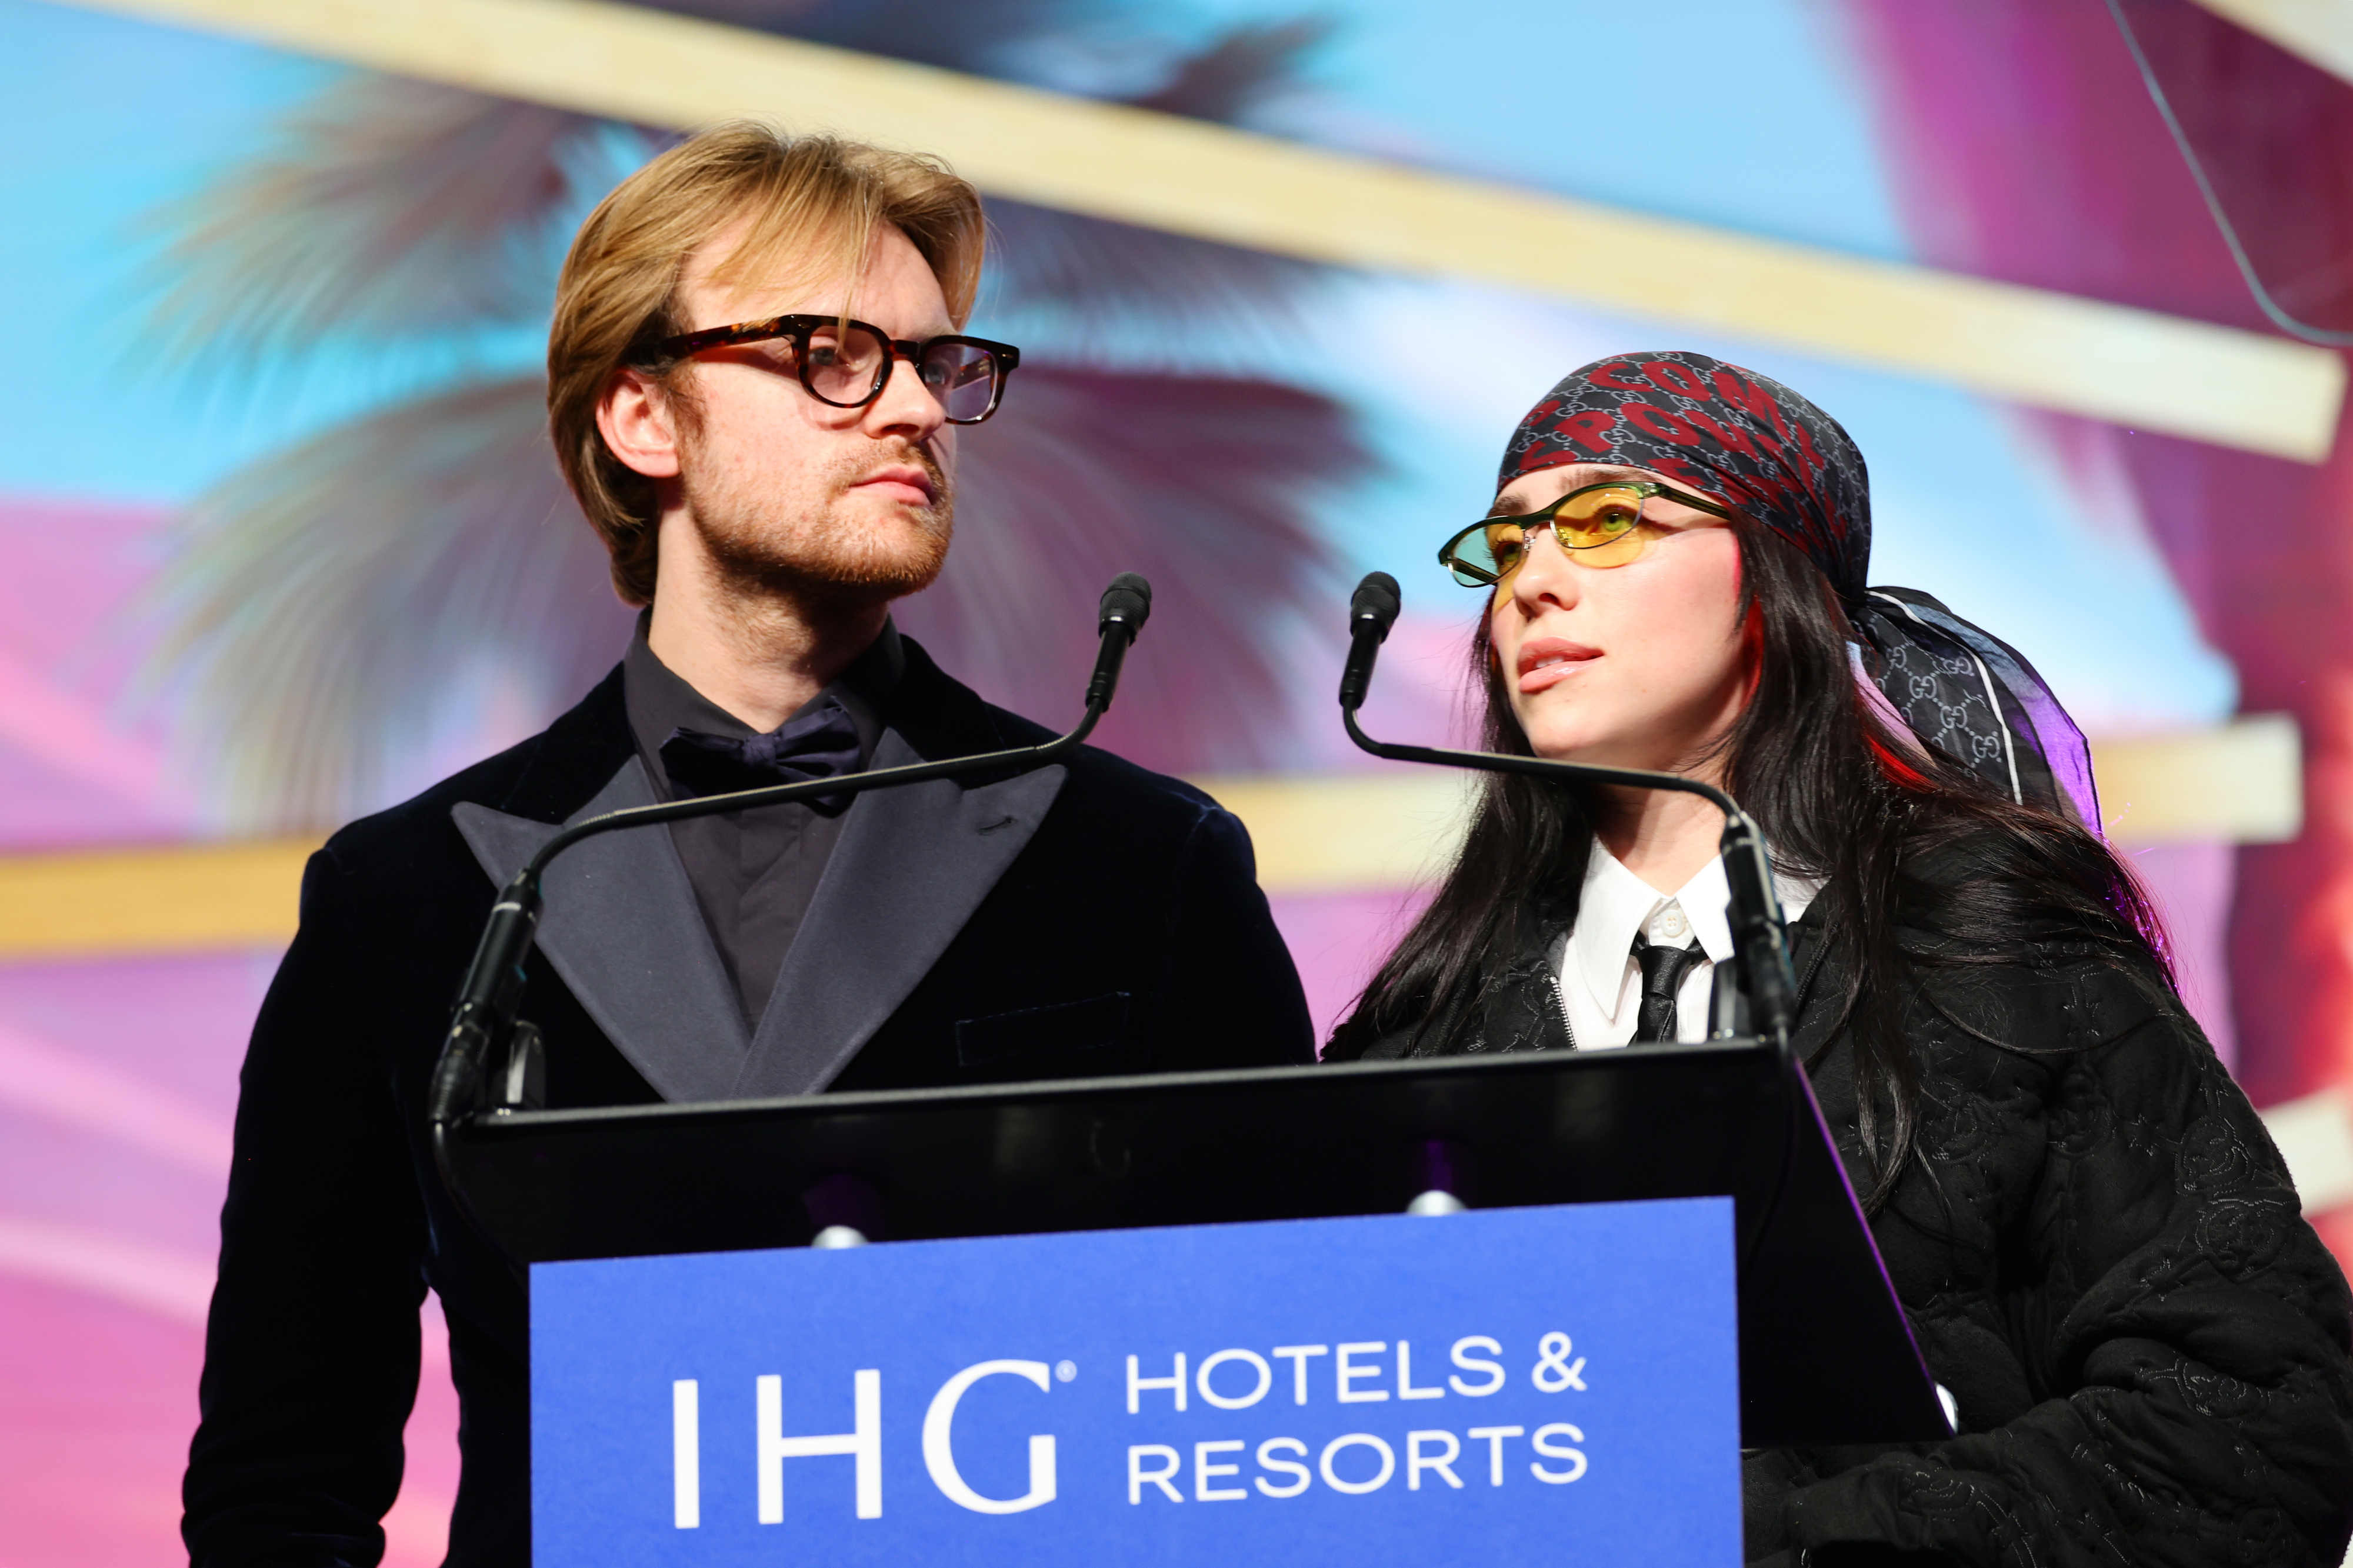 Finneas and Billie onstage at a podium